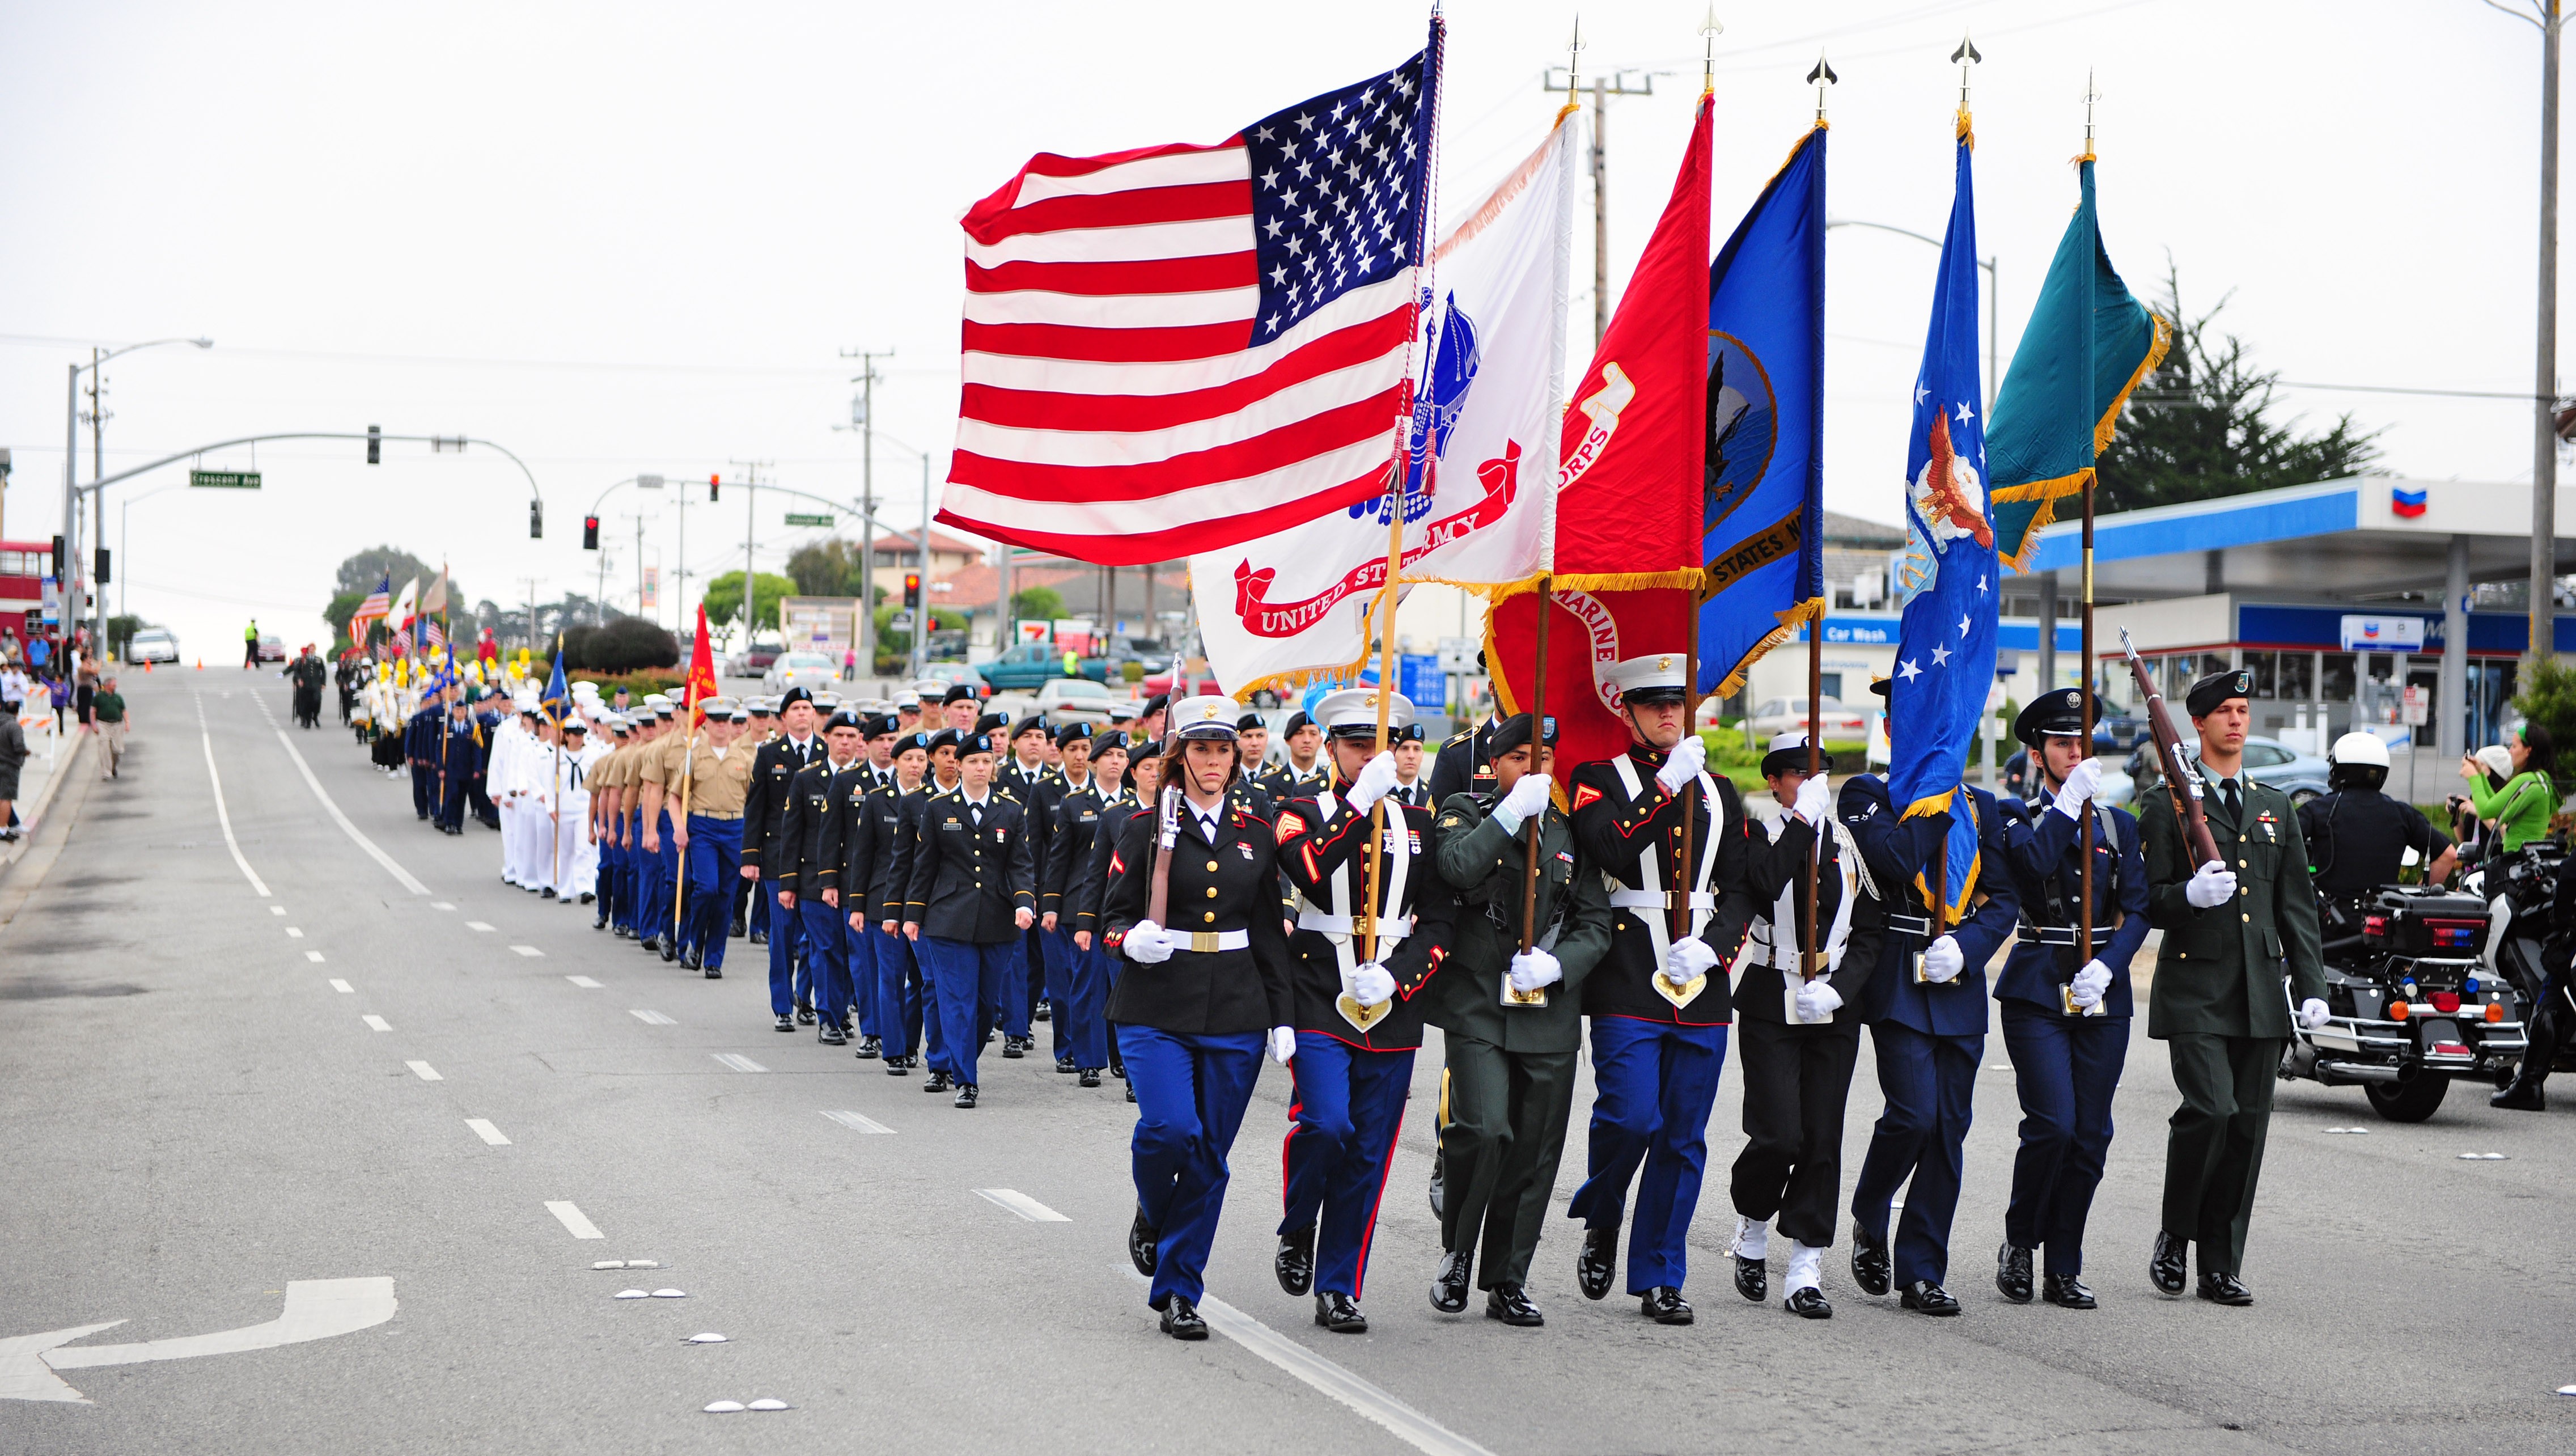 DLIFLC troops march in Marina parade | Article | The United States Army